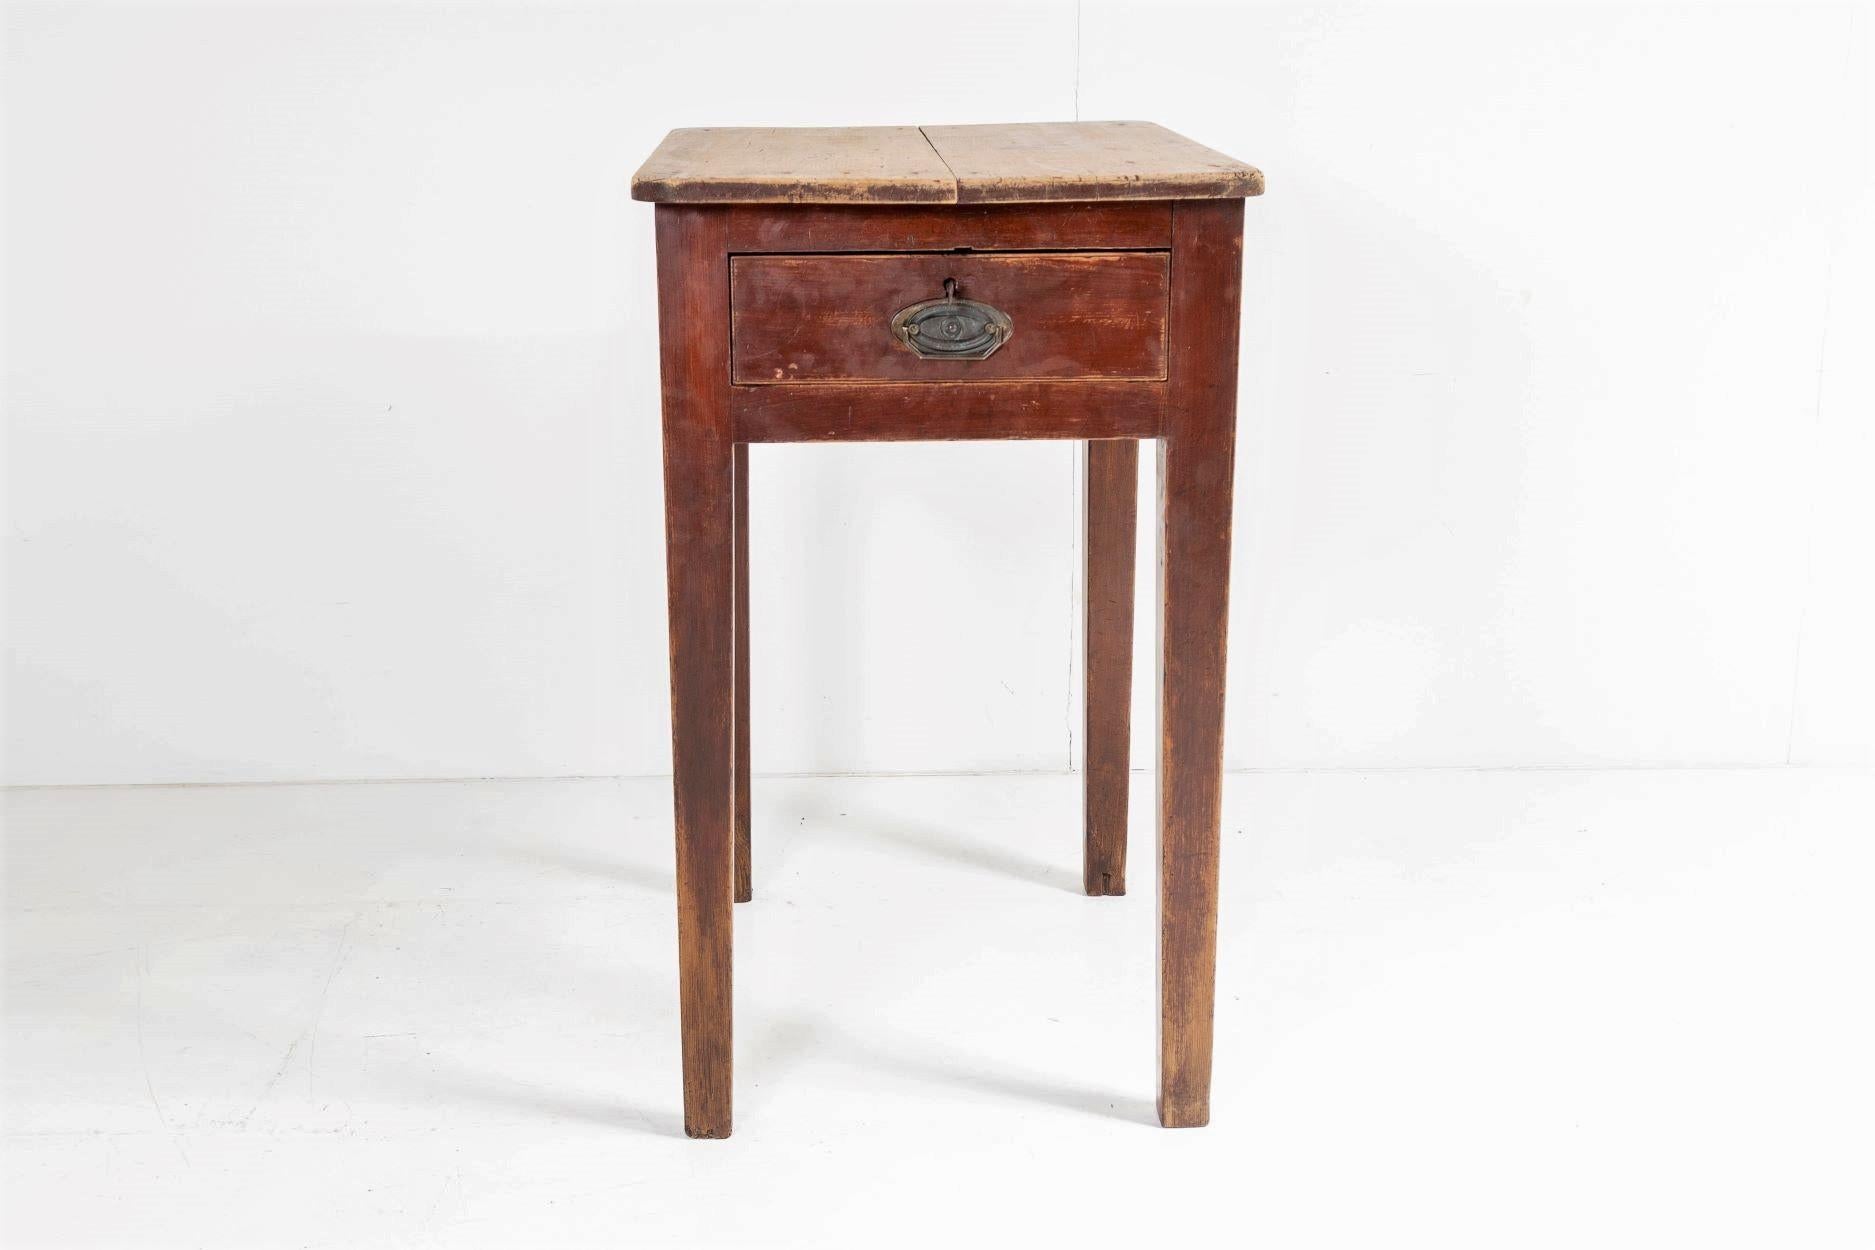 Schoolhouse Unusual Welsh Pine Hall Occasional Table Desk with Single Drawer Circa 1890 For Sale